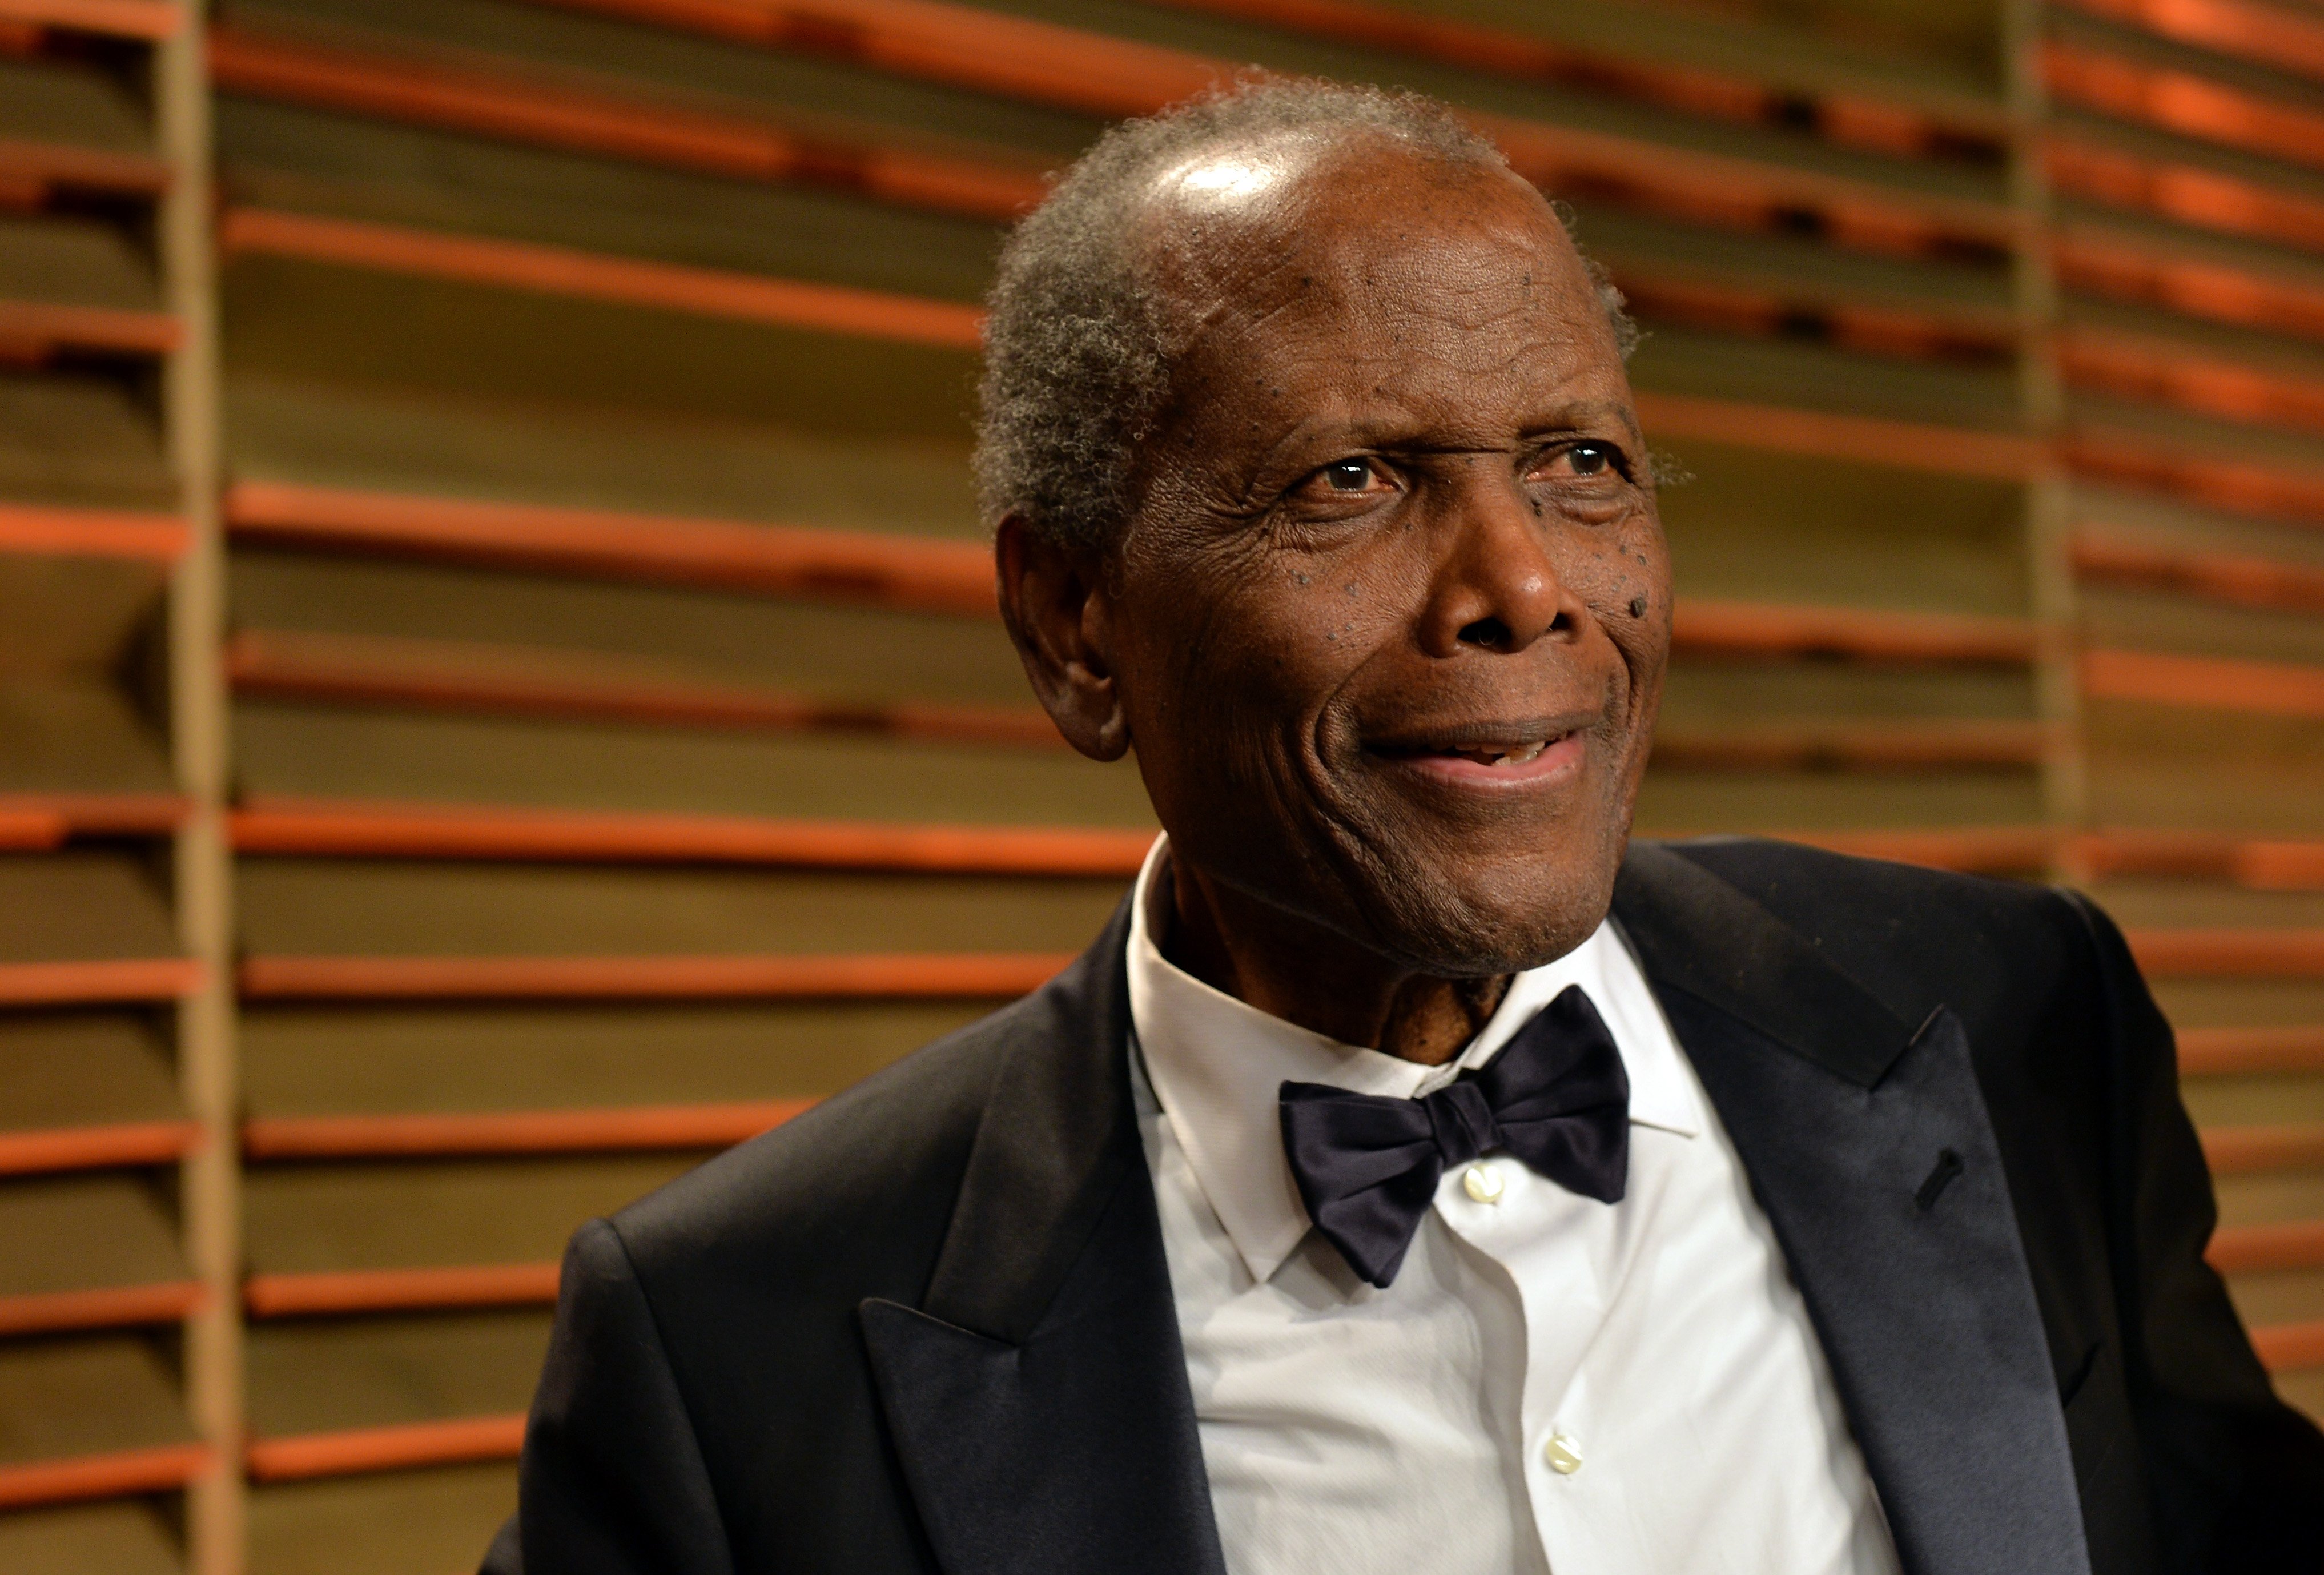 Sidney Poitier attends the 2014 Vanity Fair Oscar Party on March 2, 2014 | Photo: Getty Images